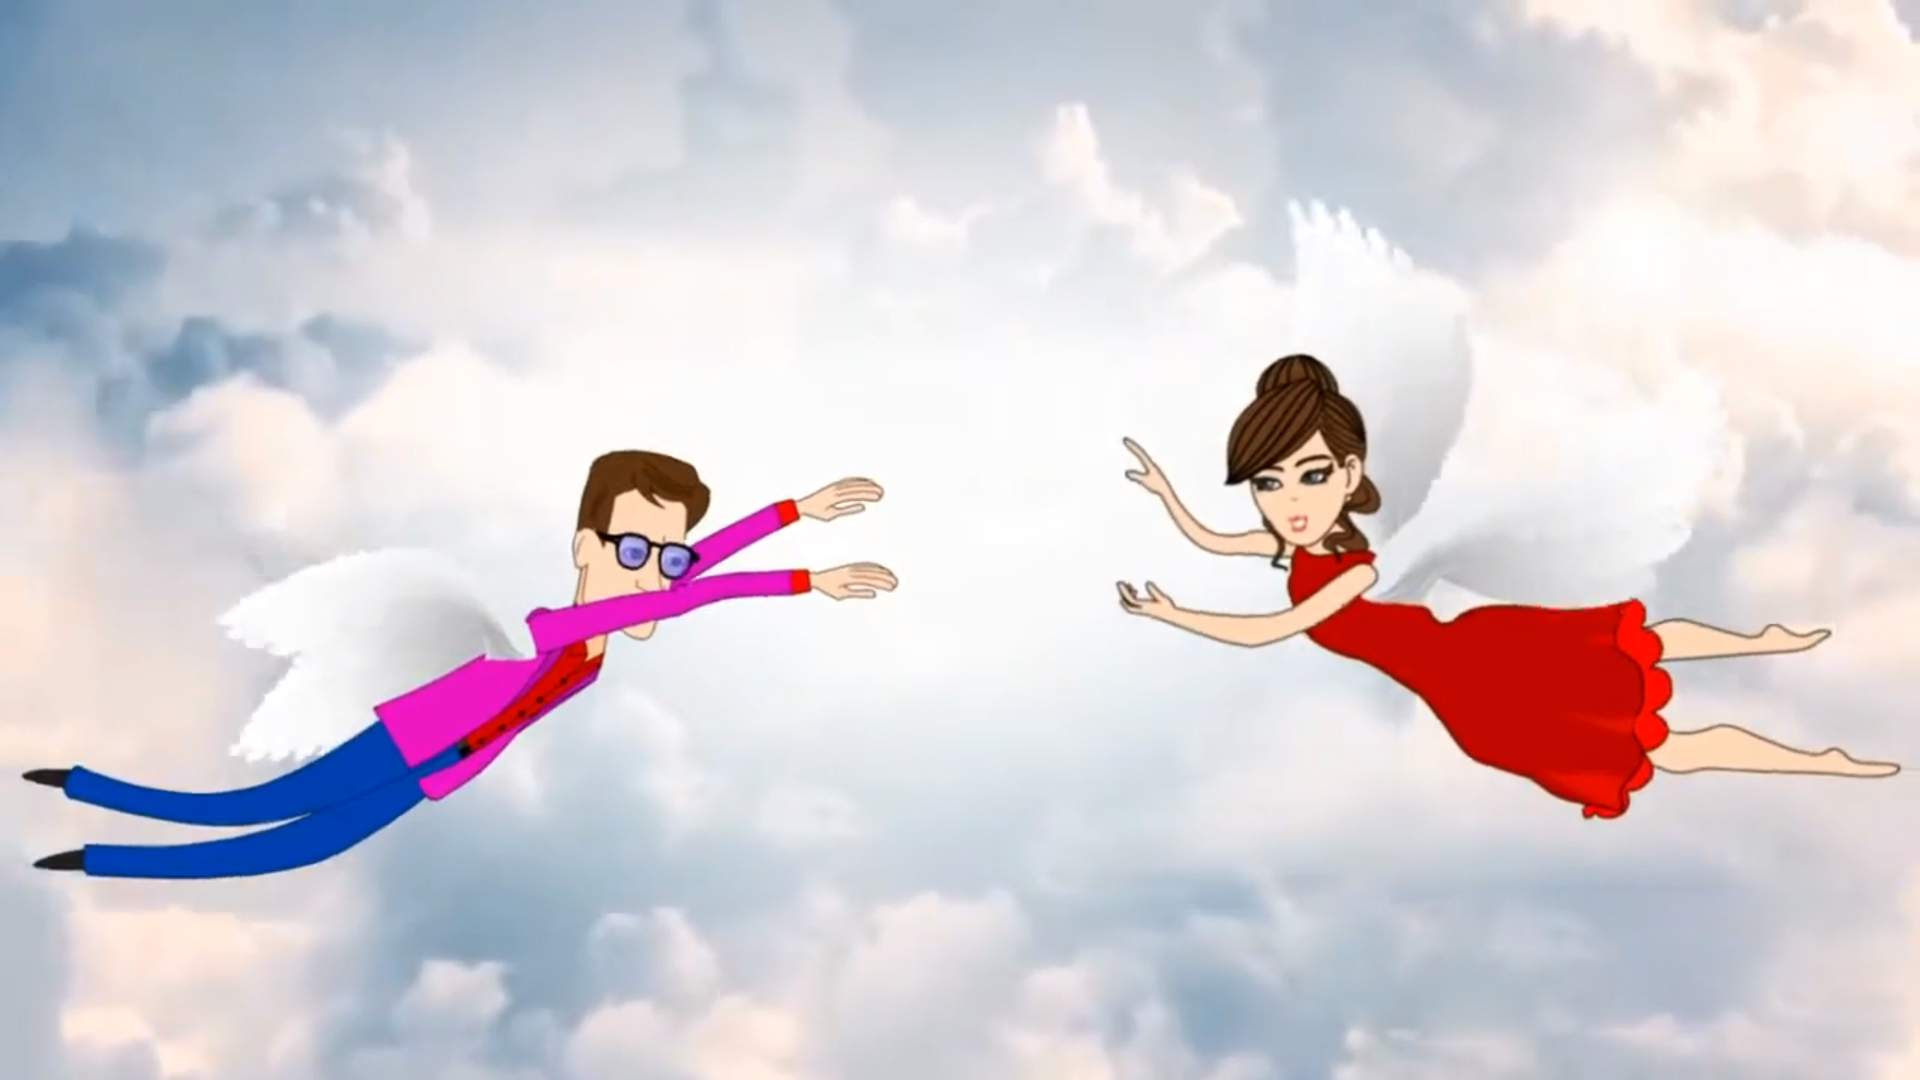 Cool Song with 2D Animated Characters, Disco Dance, Creative Marketing video by Graphite Work